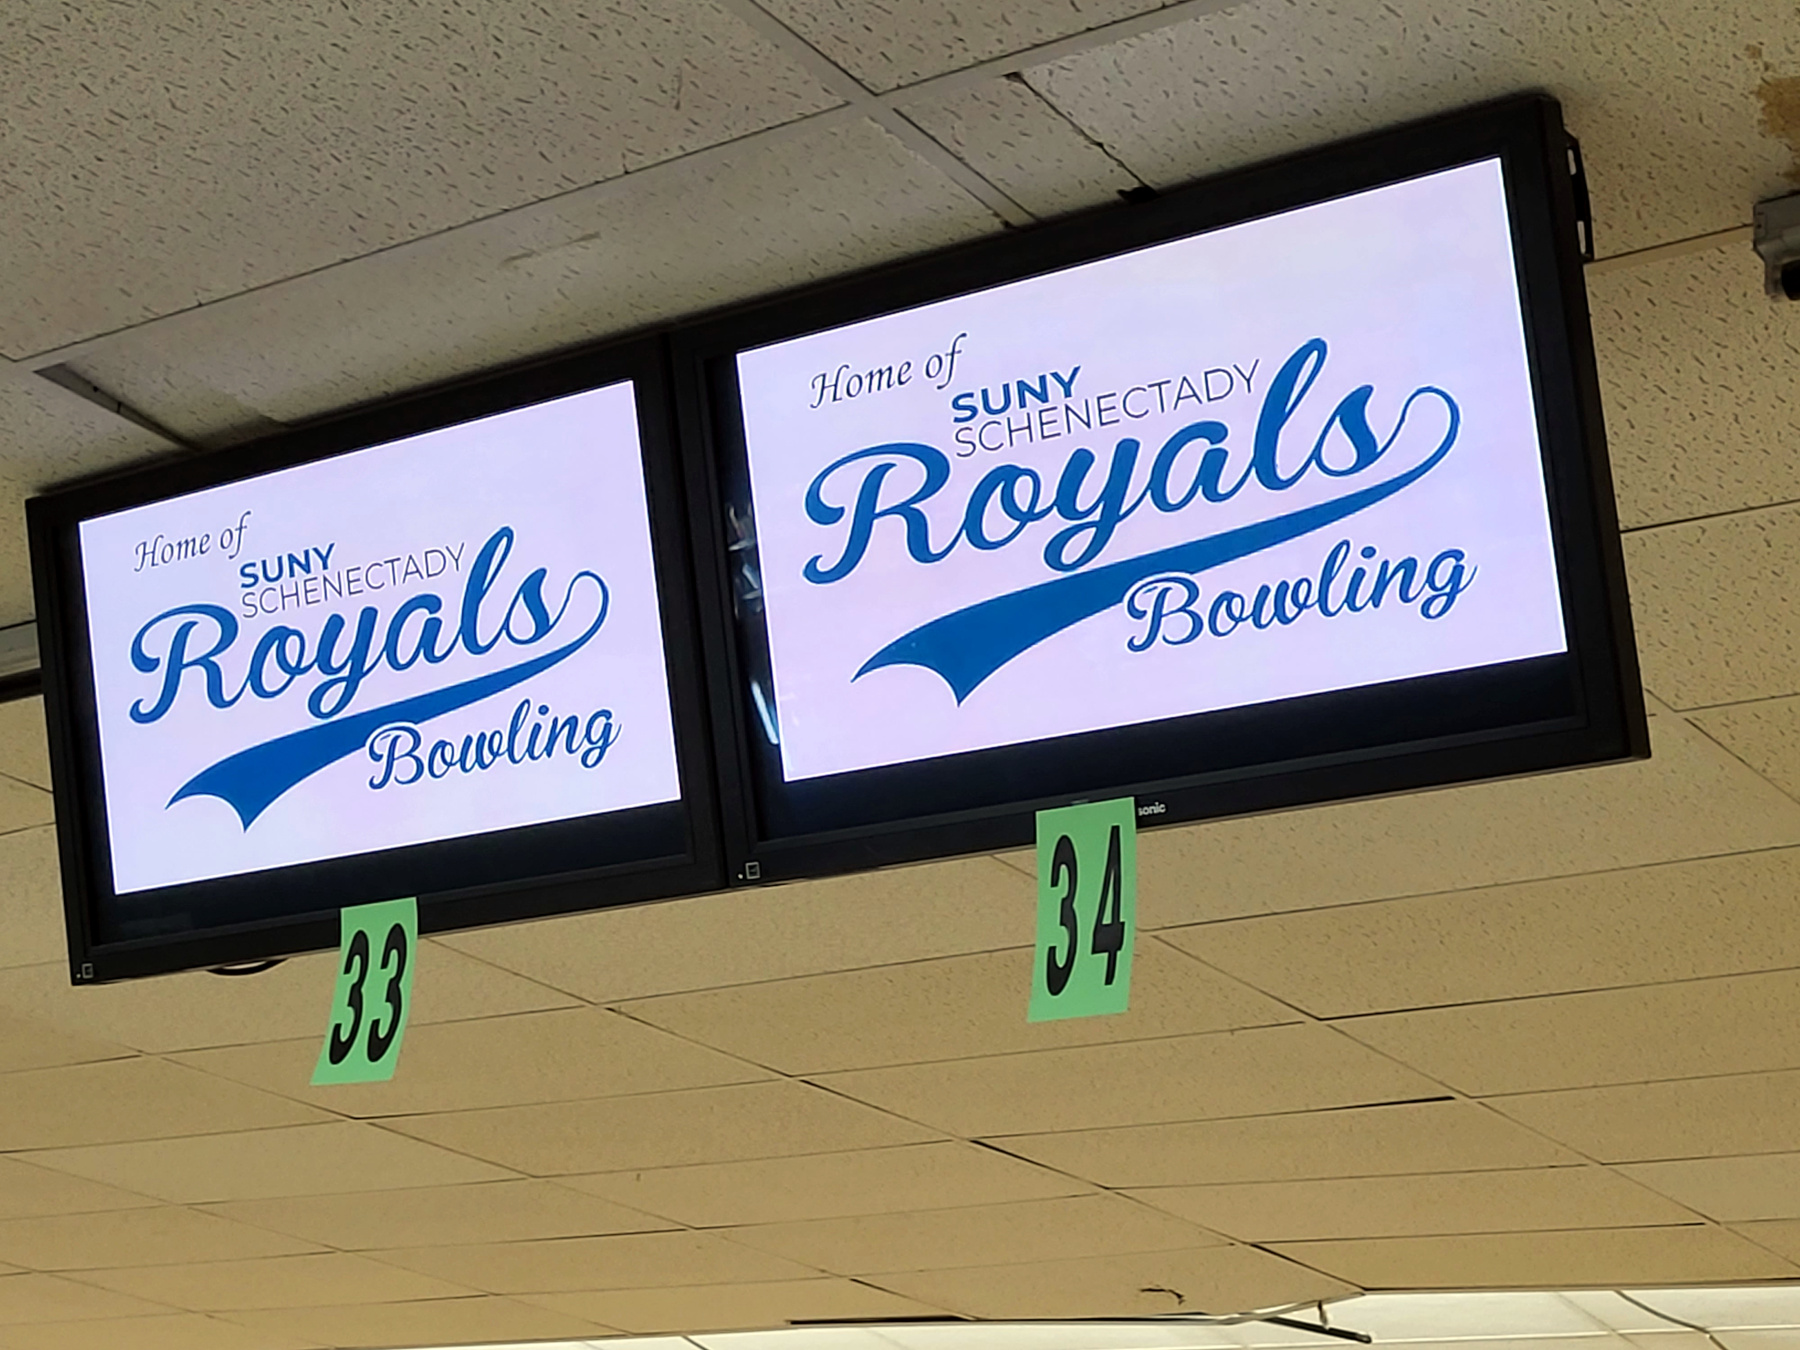 Bowling sign in Boulevard Bowl, home of the Royals